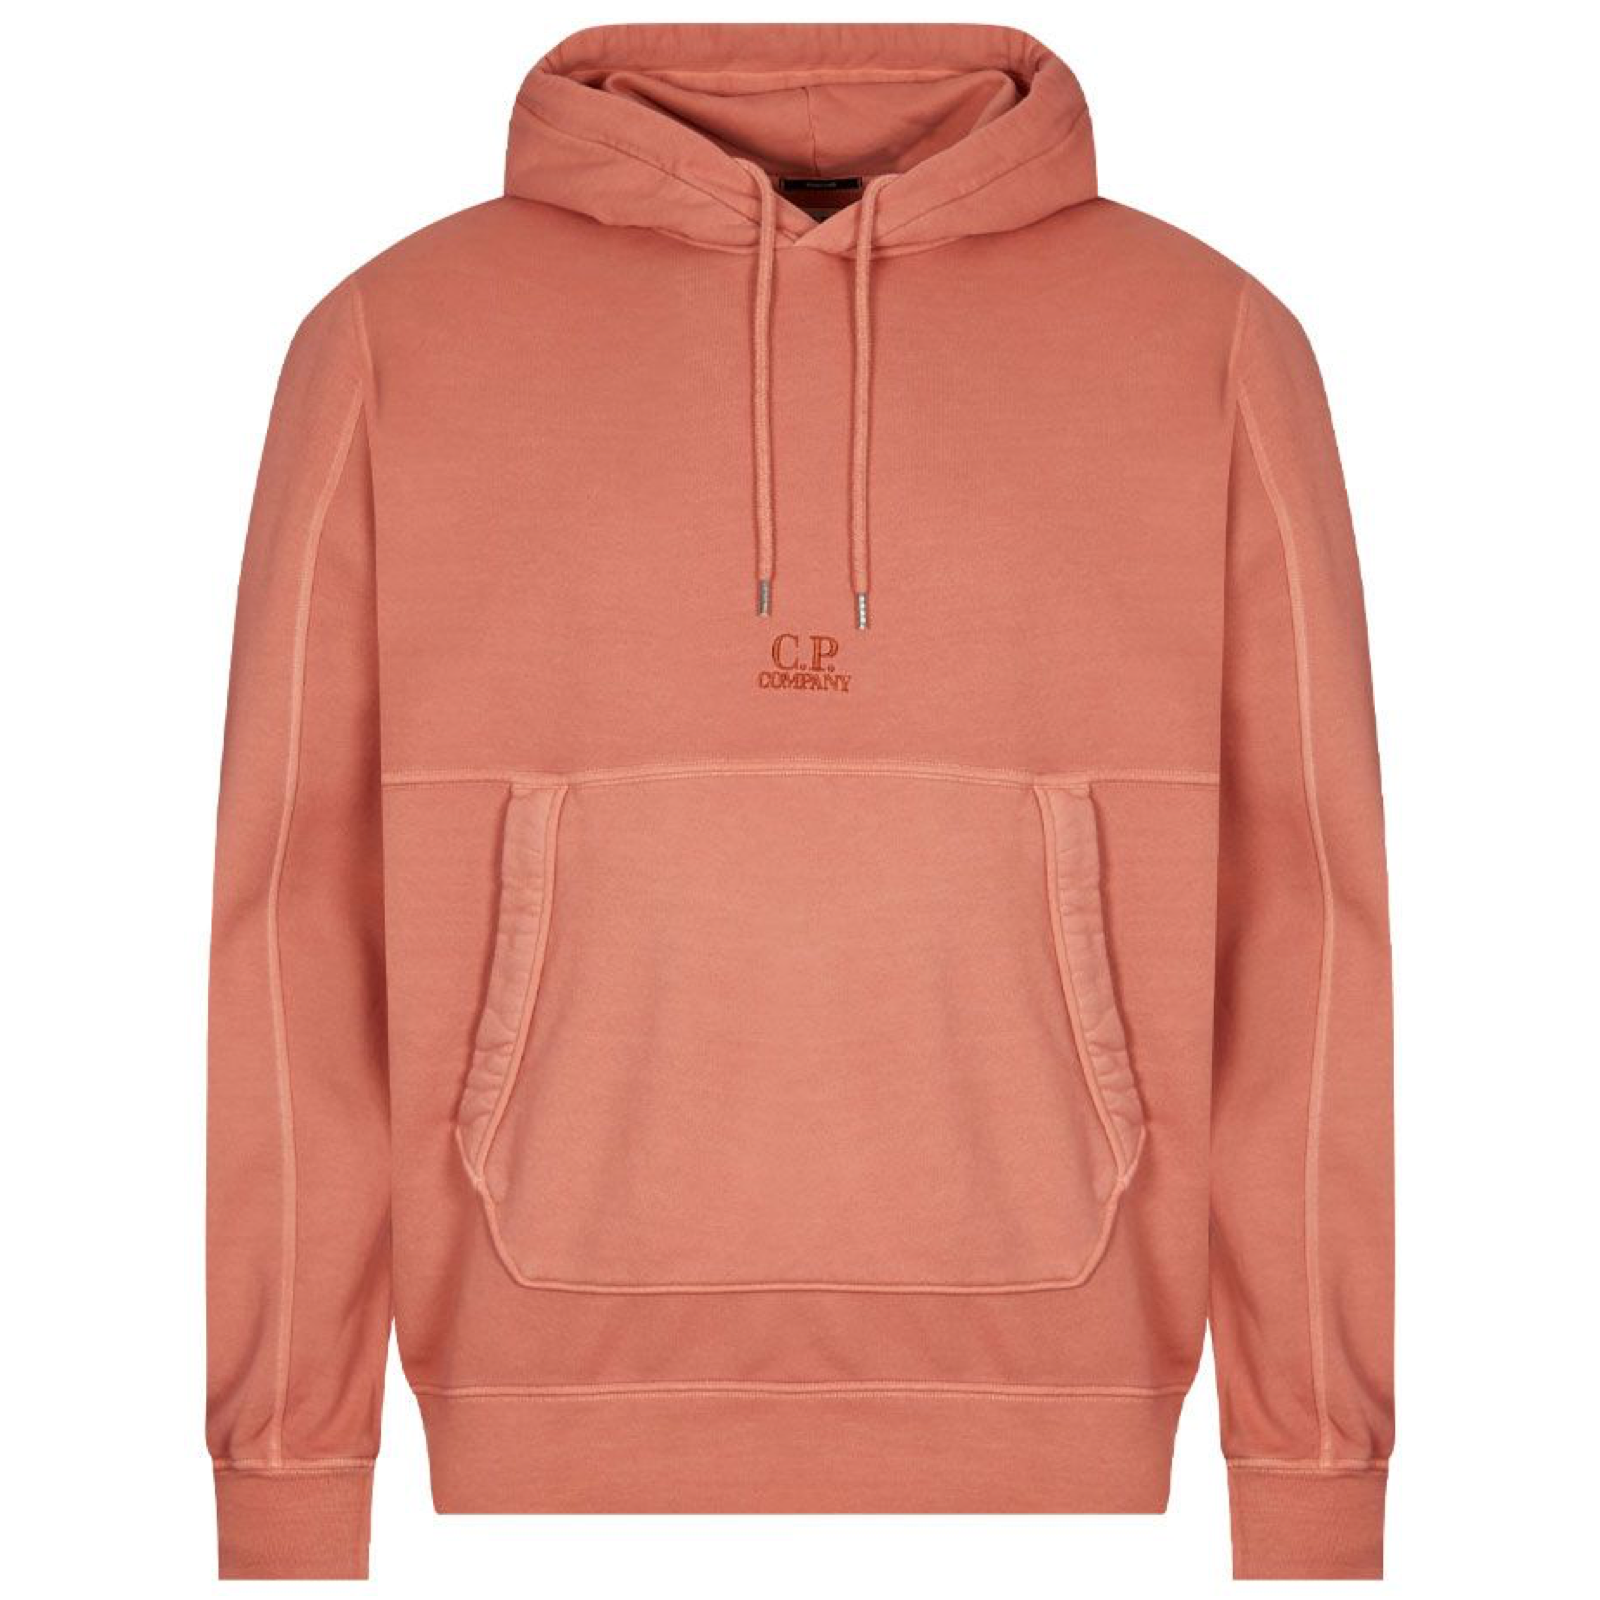 CP Company Embroidered Logo Hoodie - DANYOUNGUK